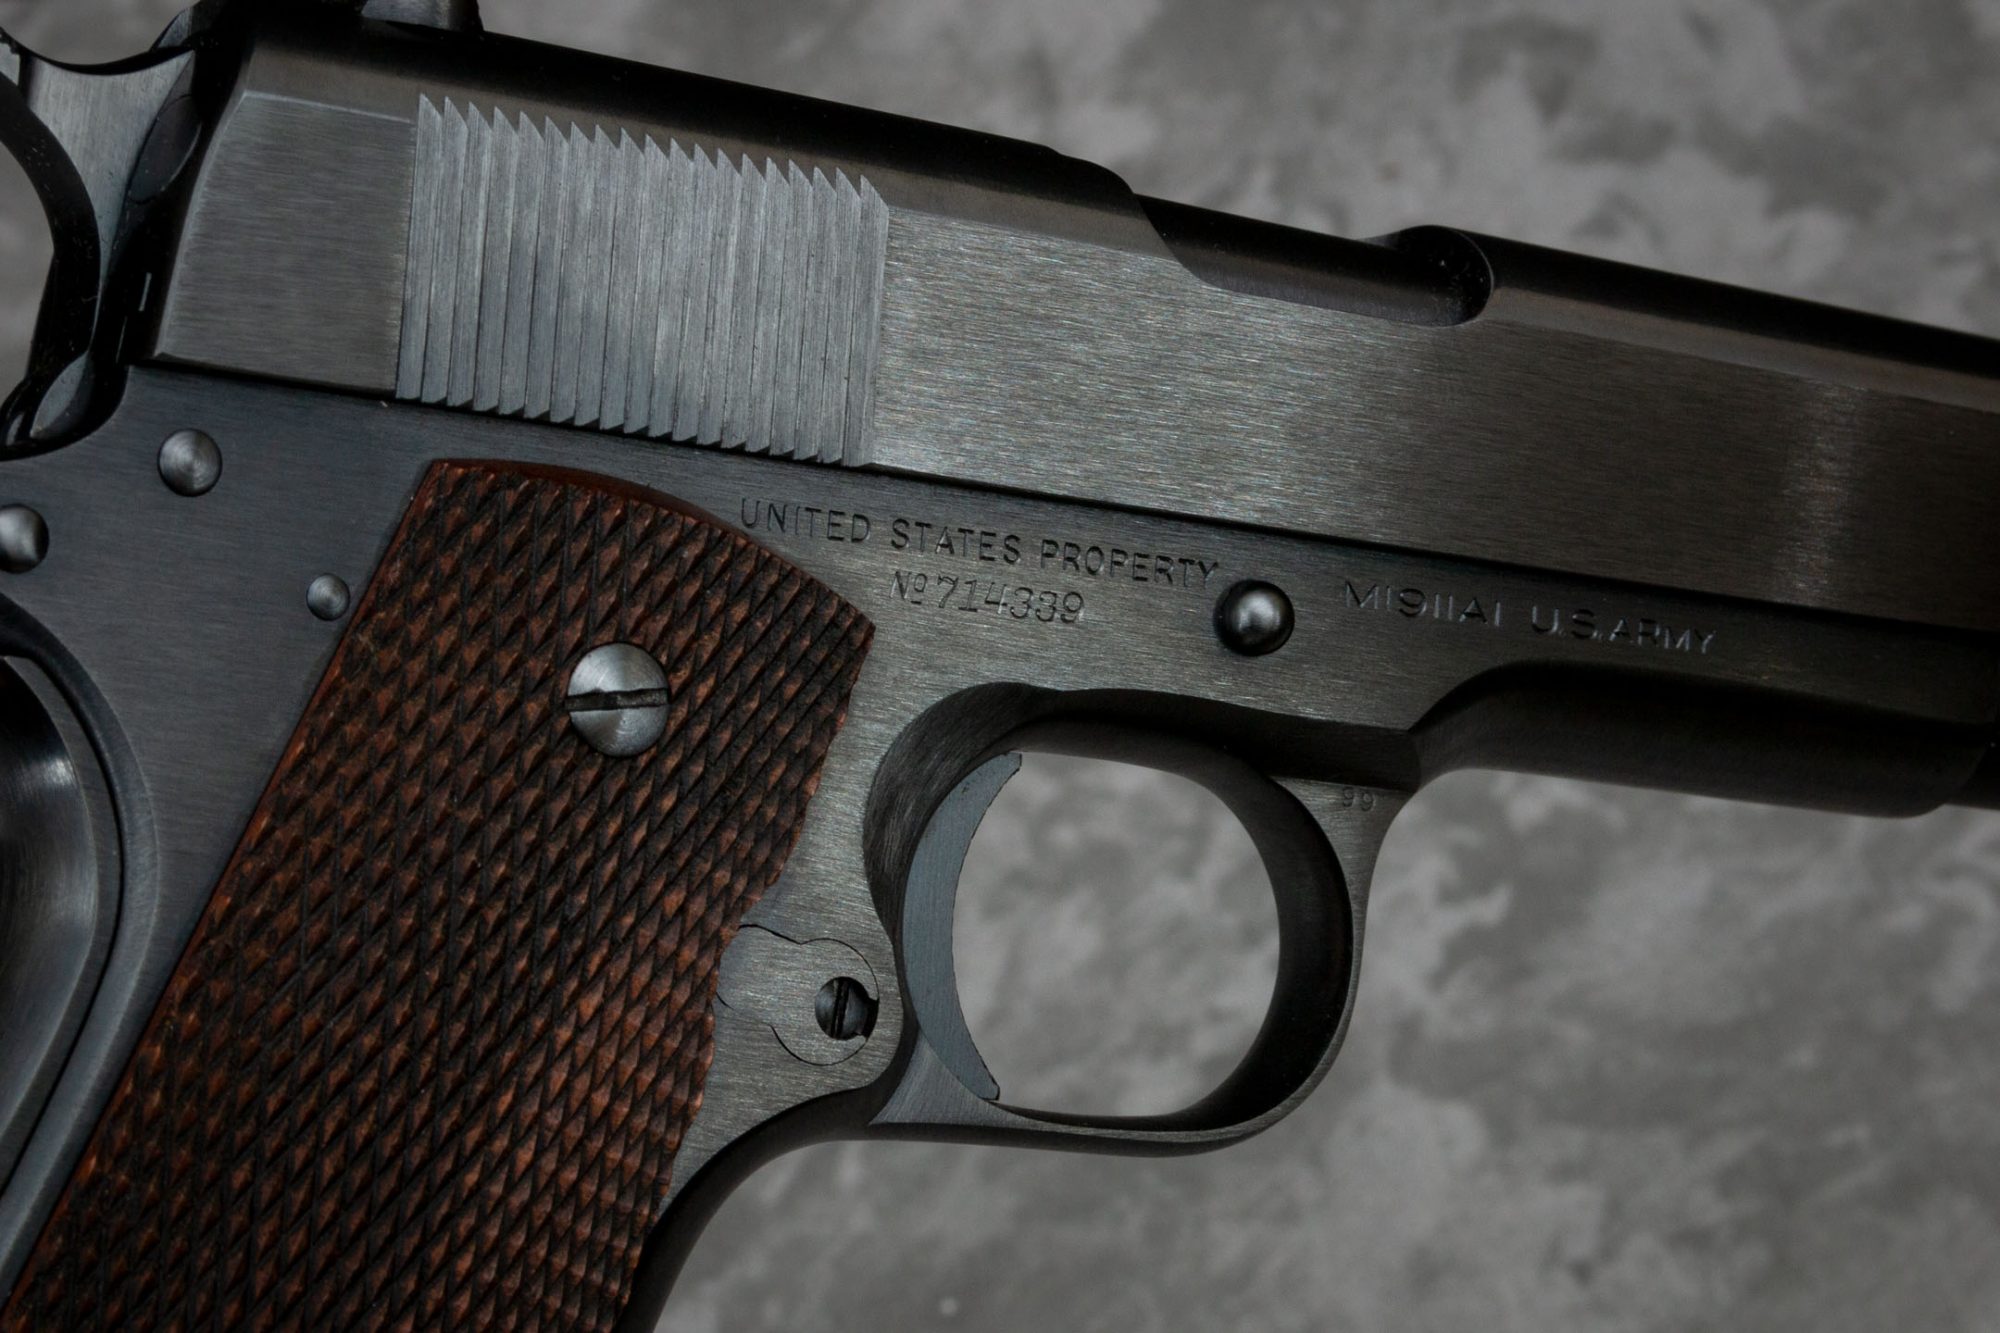 Photo of a Colt Model M1911 A1, restored by Turnbull Restoration Co. in 2012